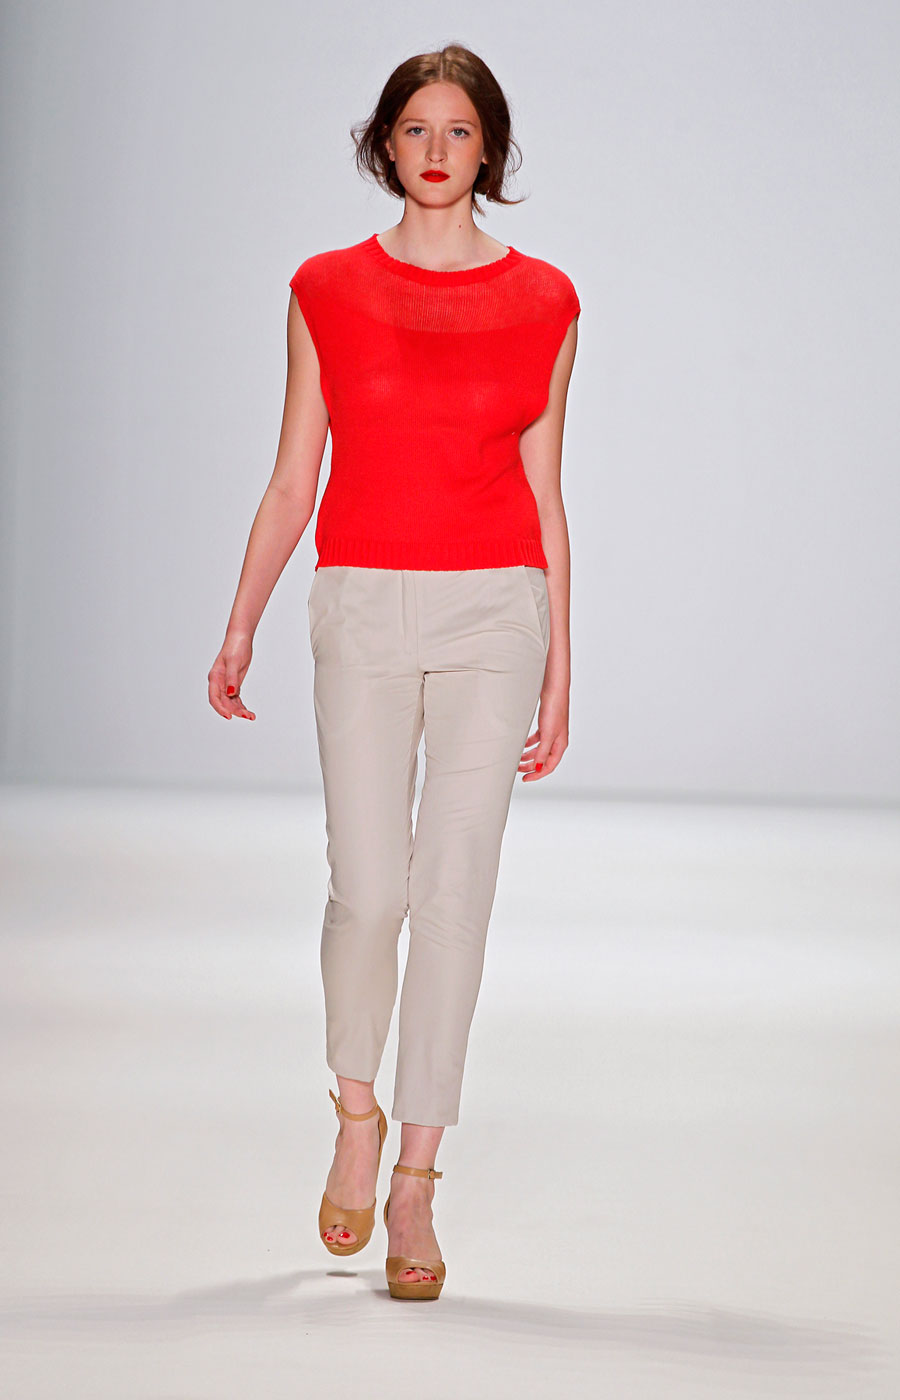 Spring/Summer 2012 by Hien Le (4)